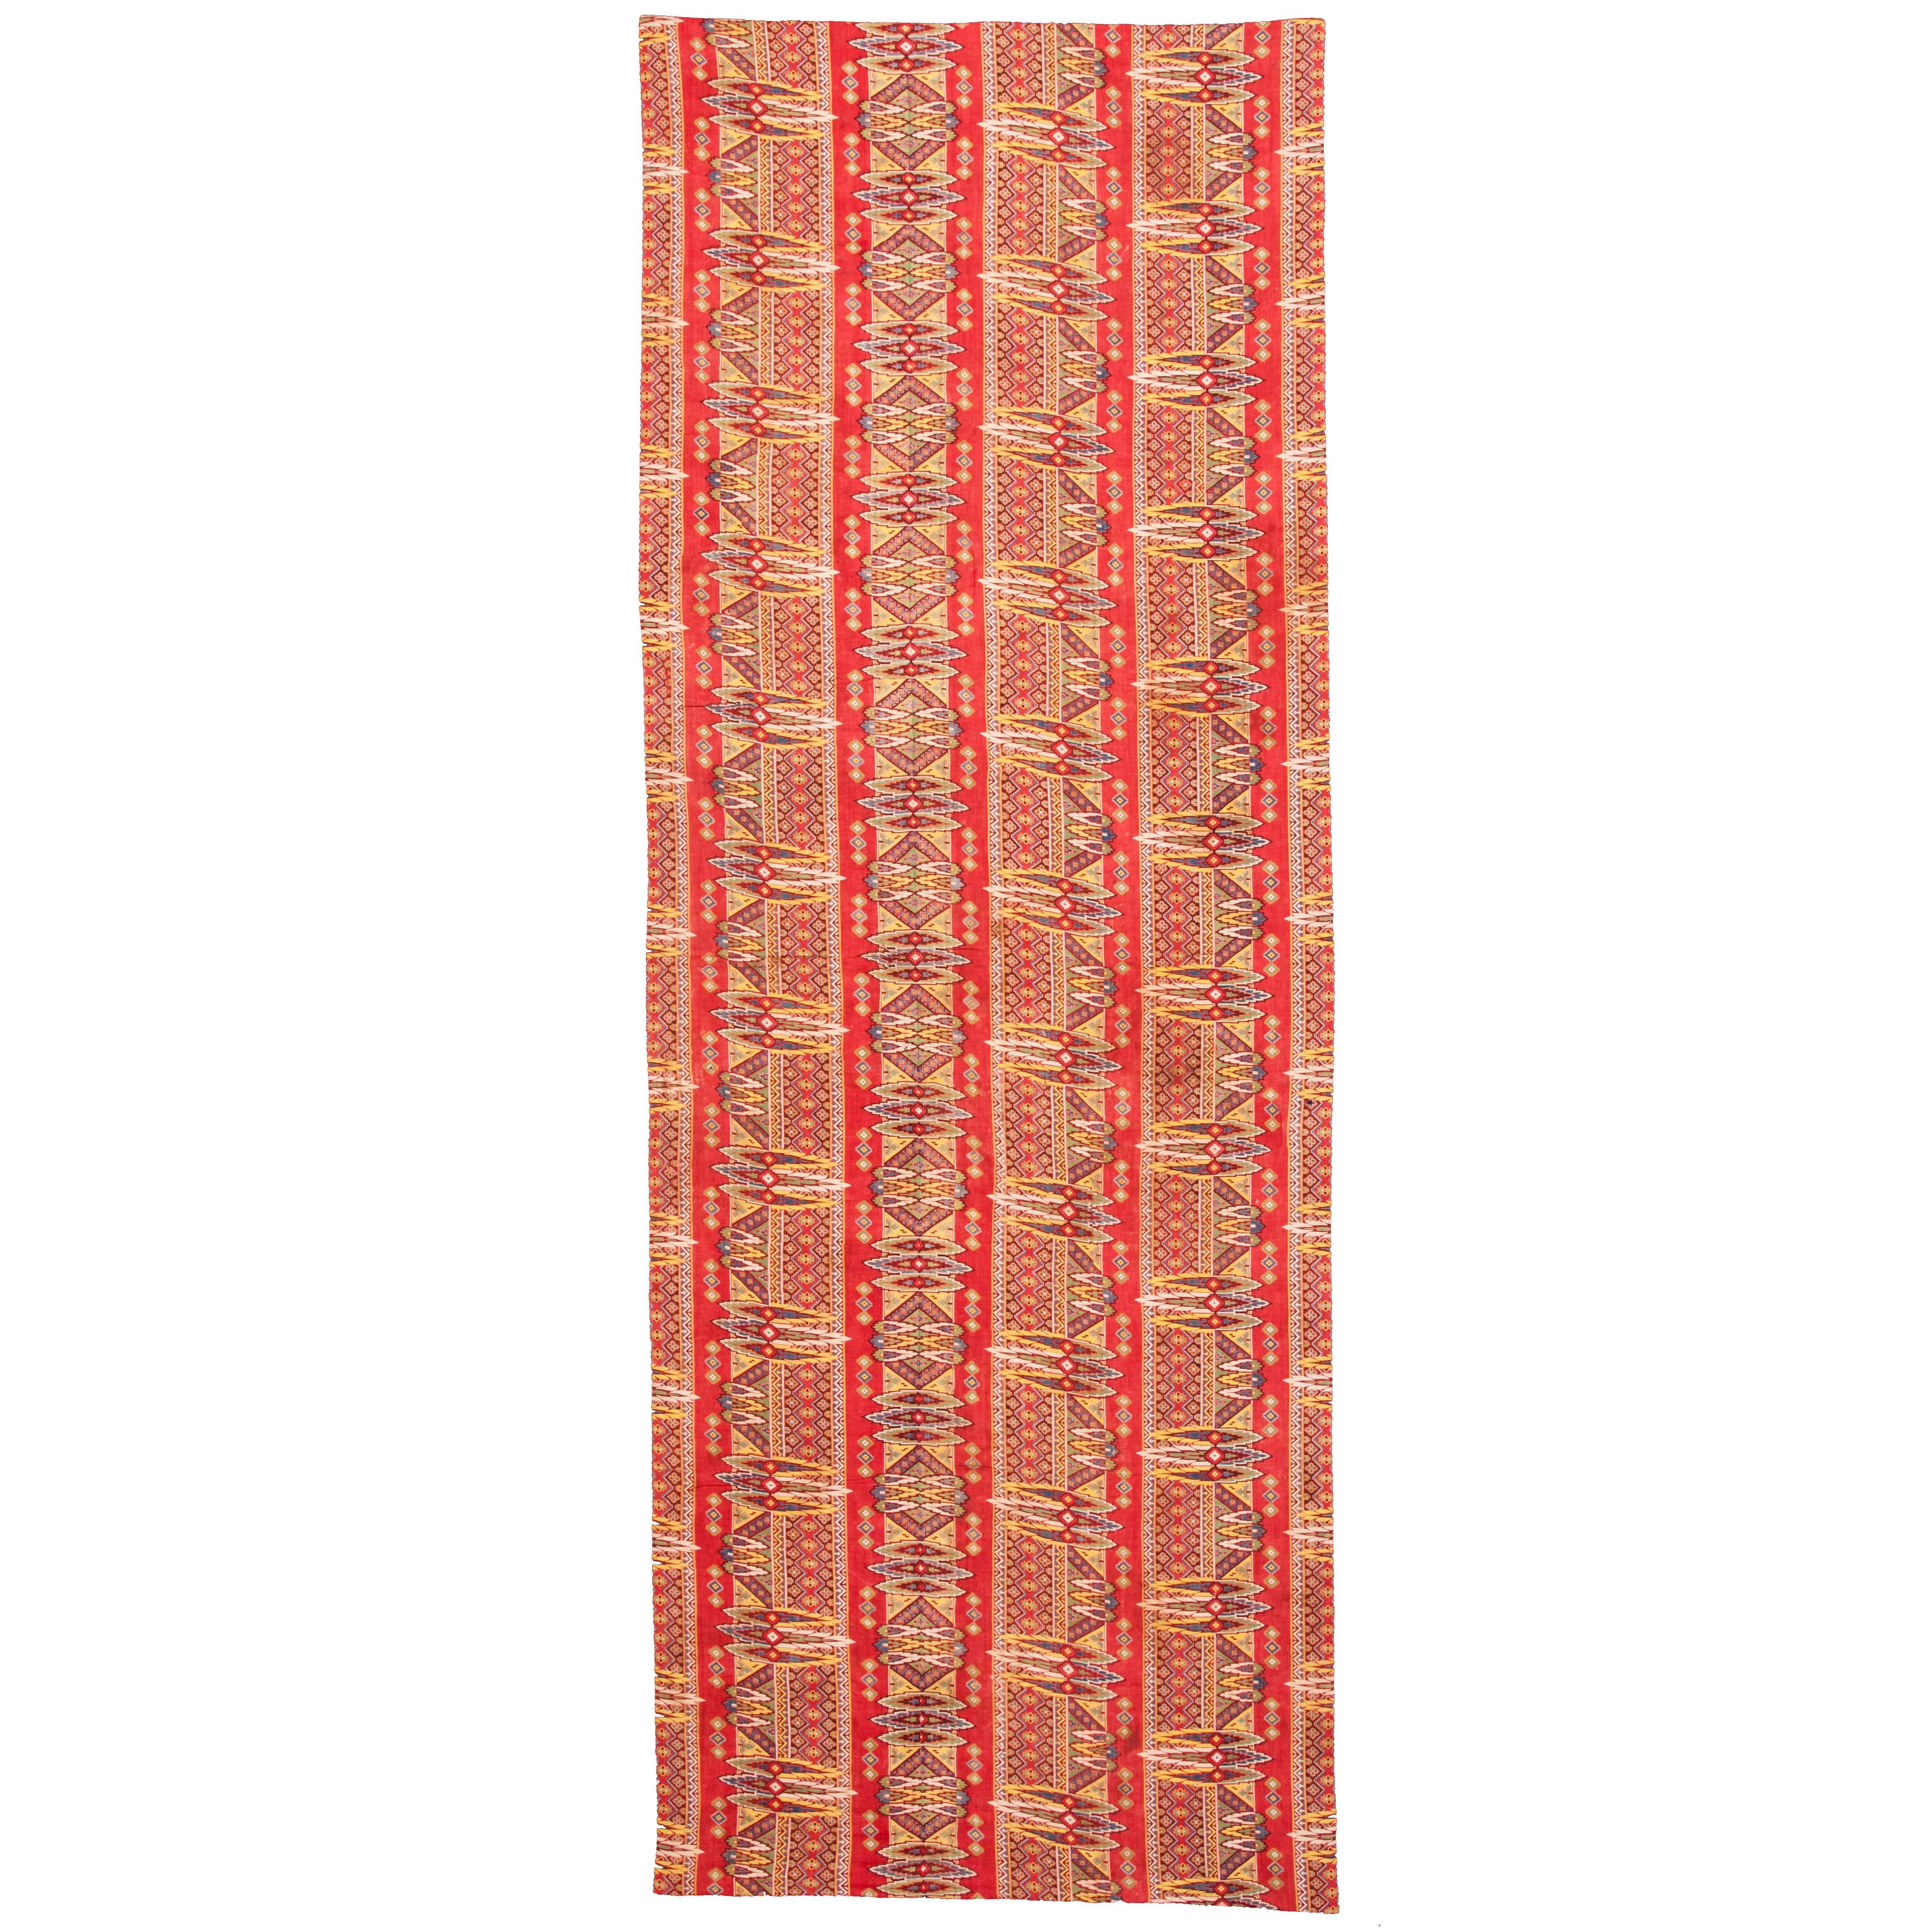 Late 19th Century Russian Roller Printed Cotton Cloth For Sale